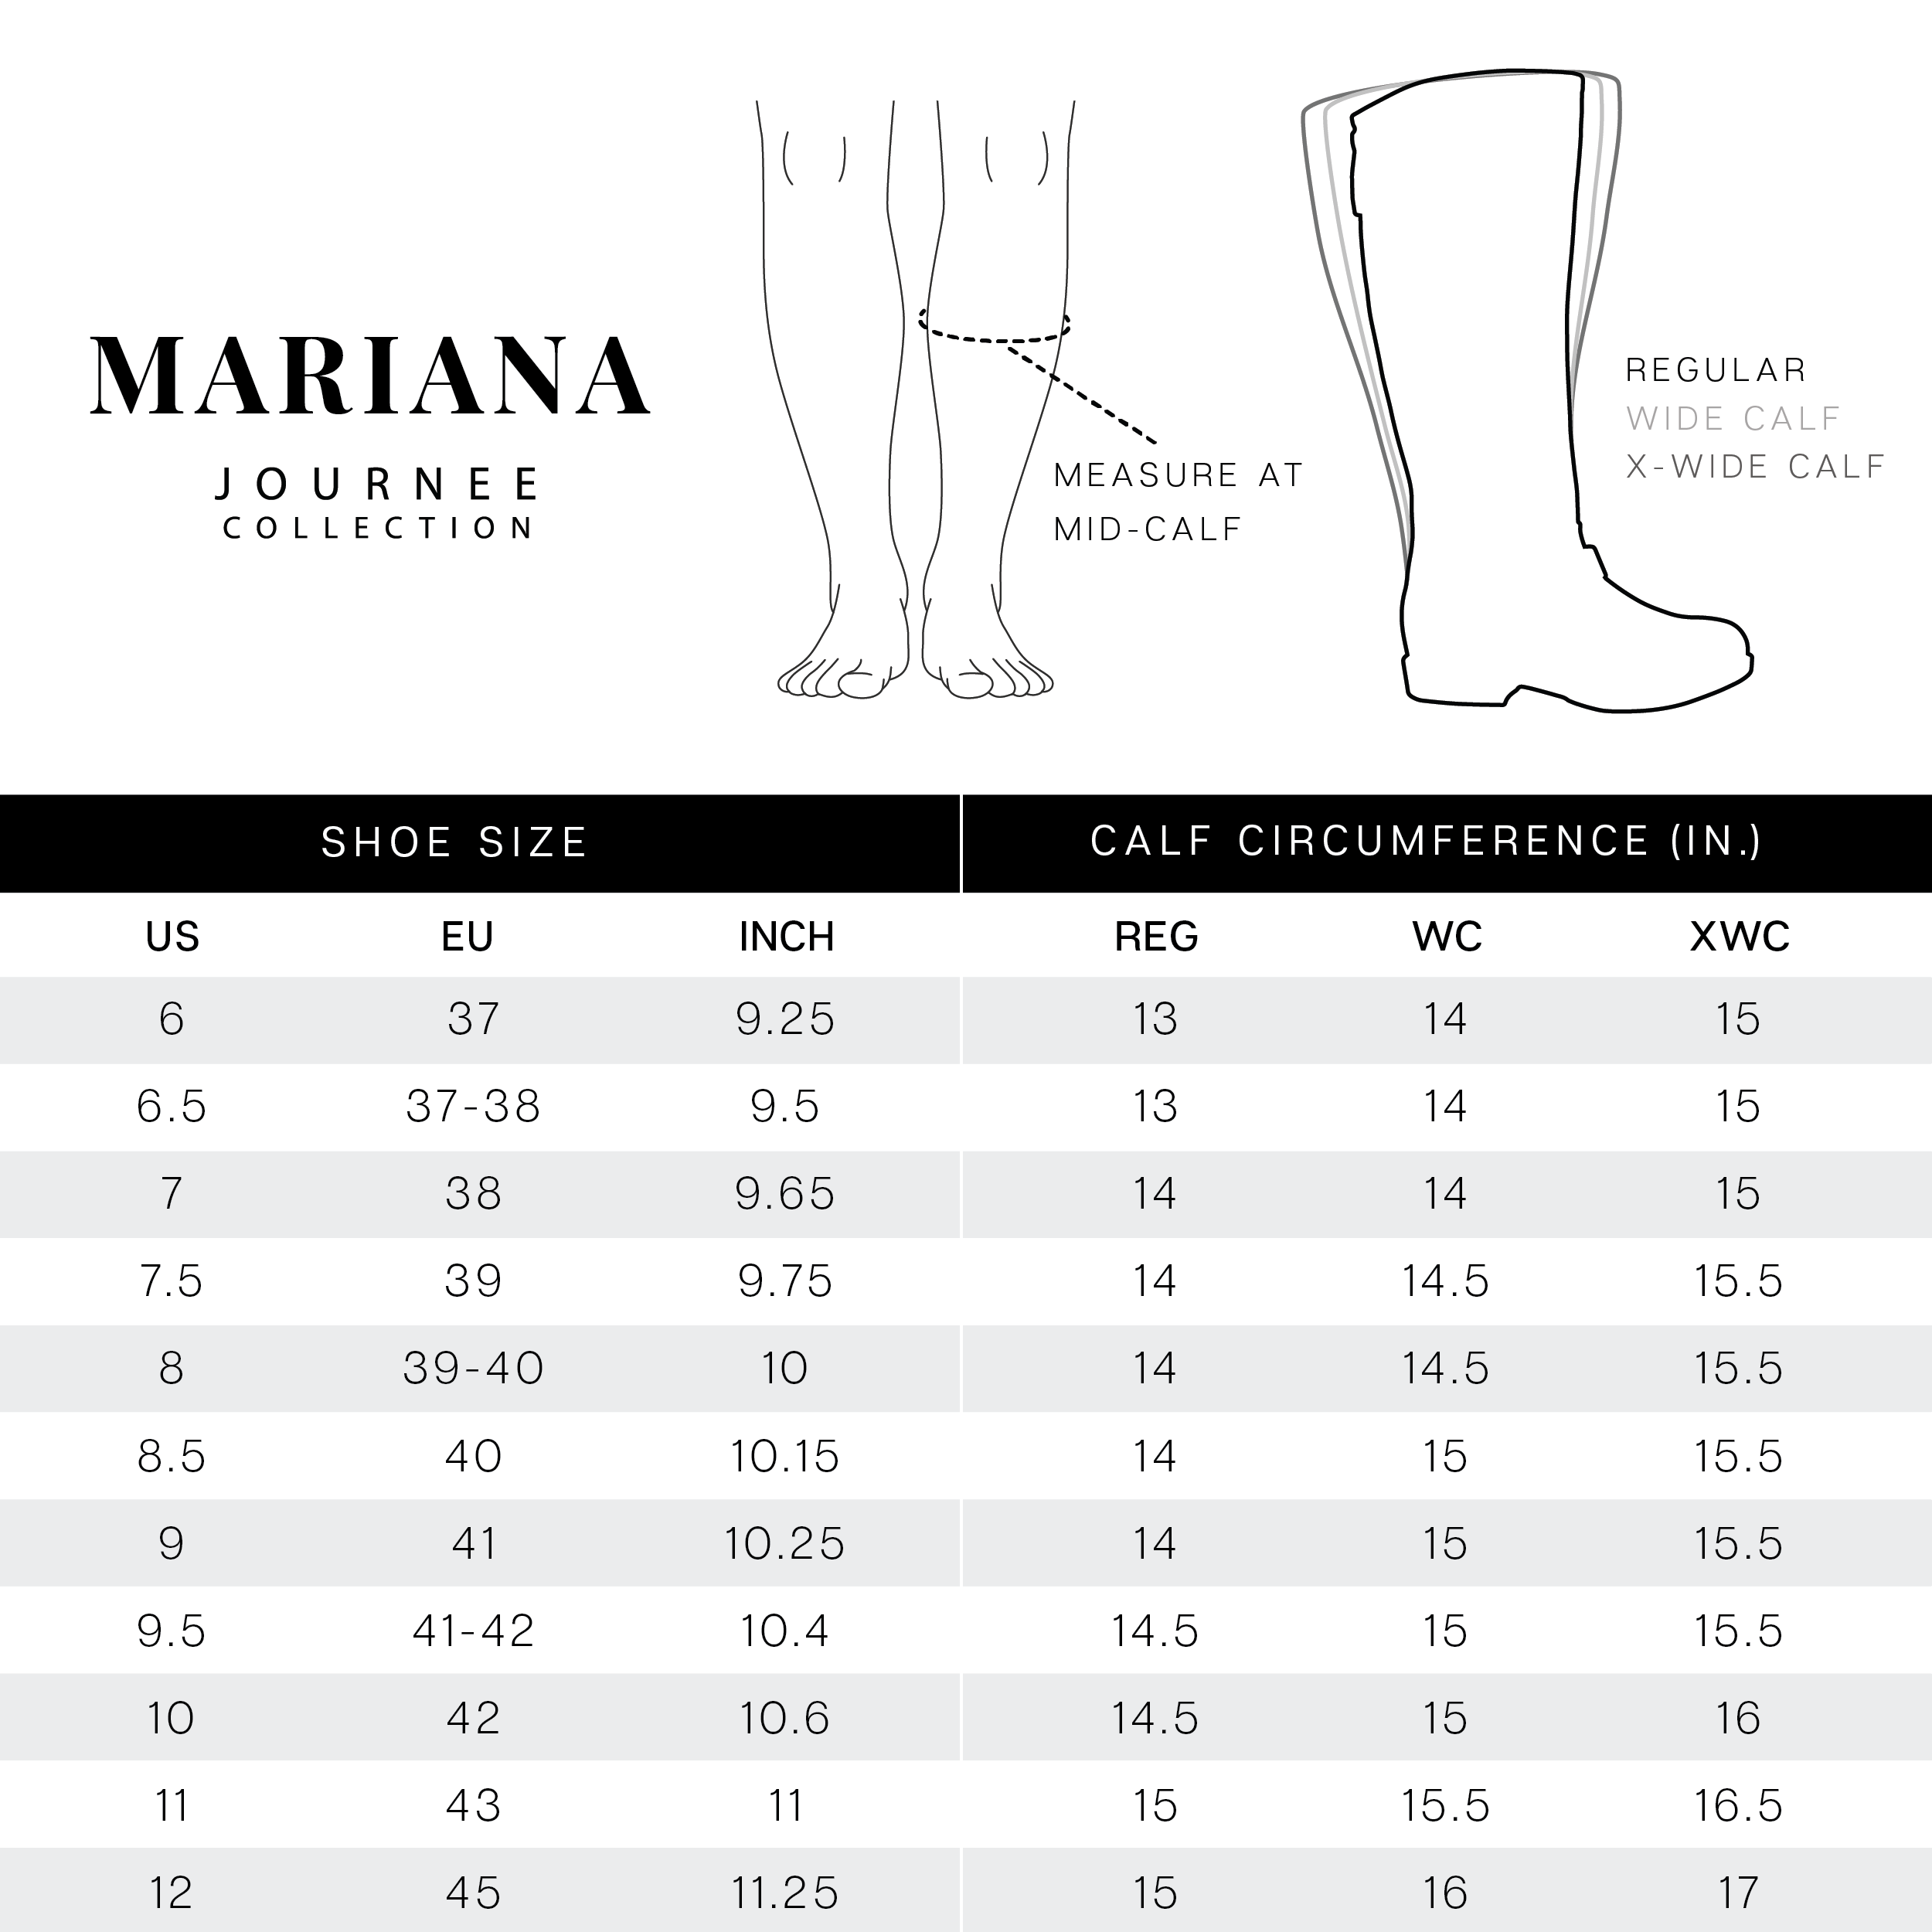 MARIANA EXTRA WIDE CALF - Journee Collection